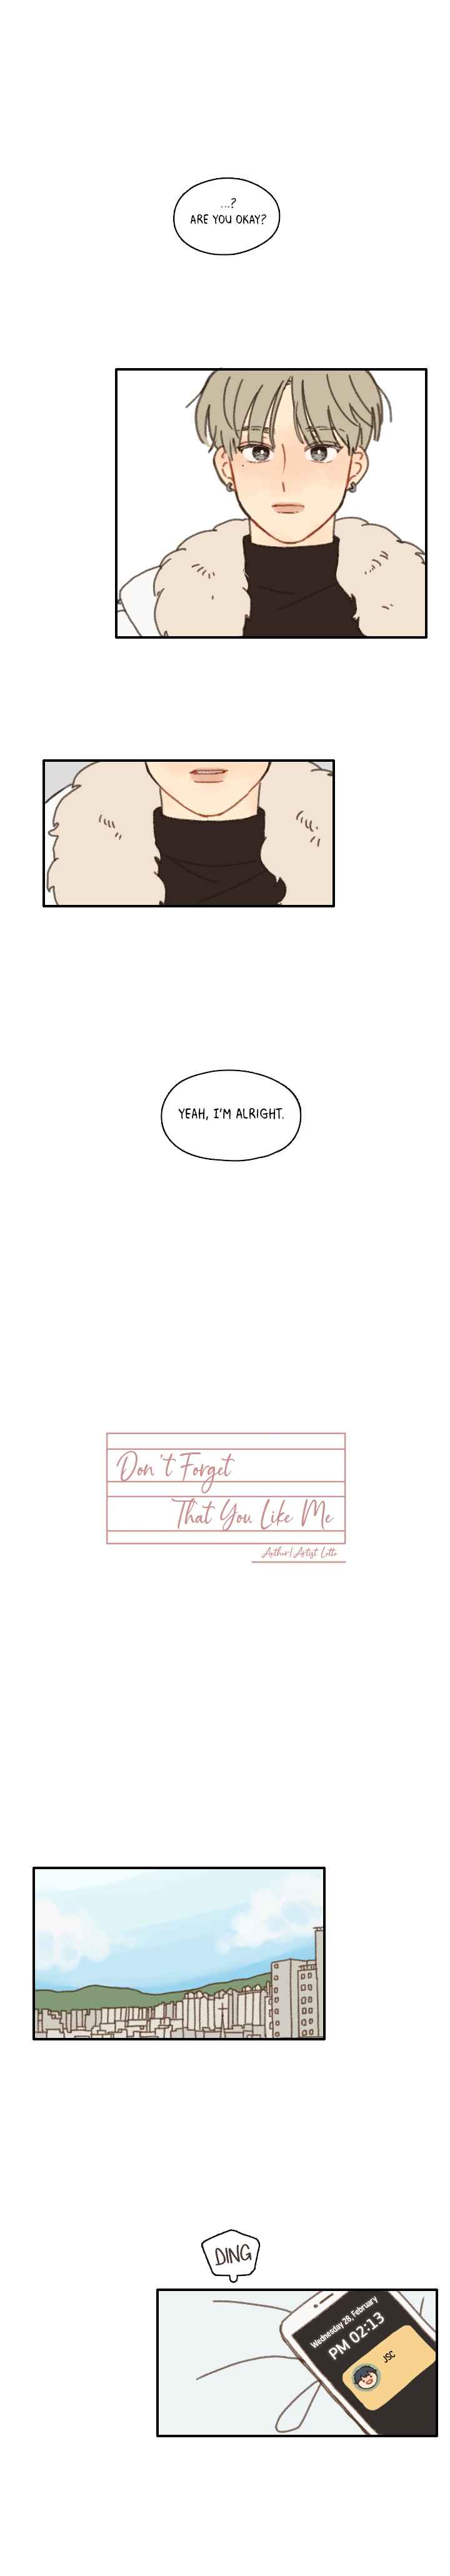 Don't Forget That You Like Me Vol. 1 Ch. 2